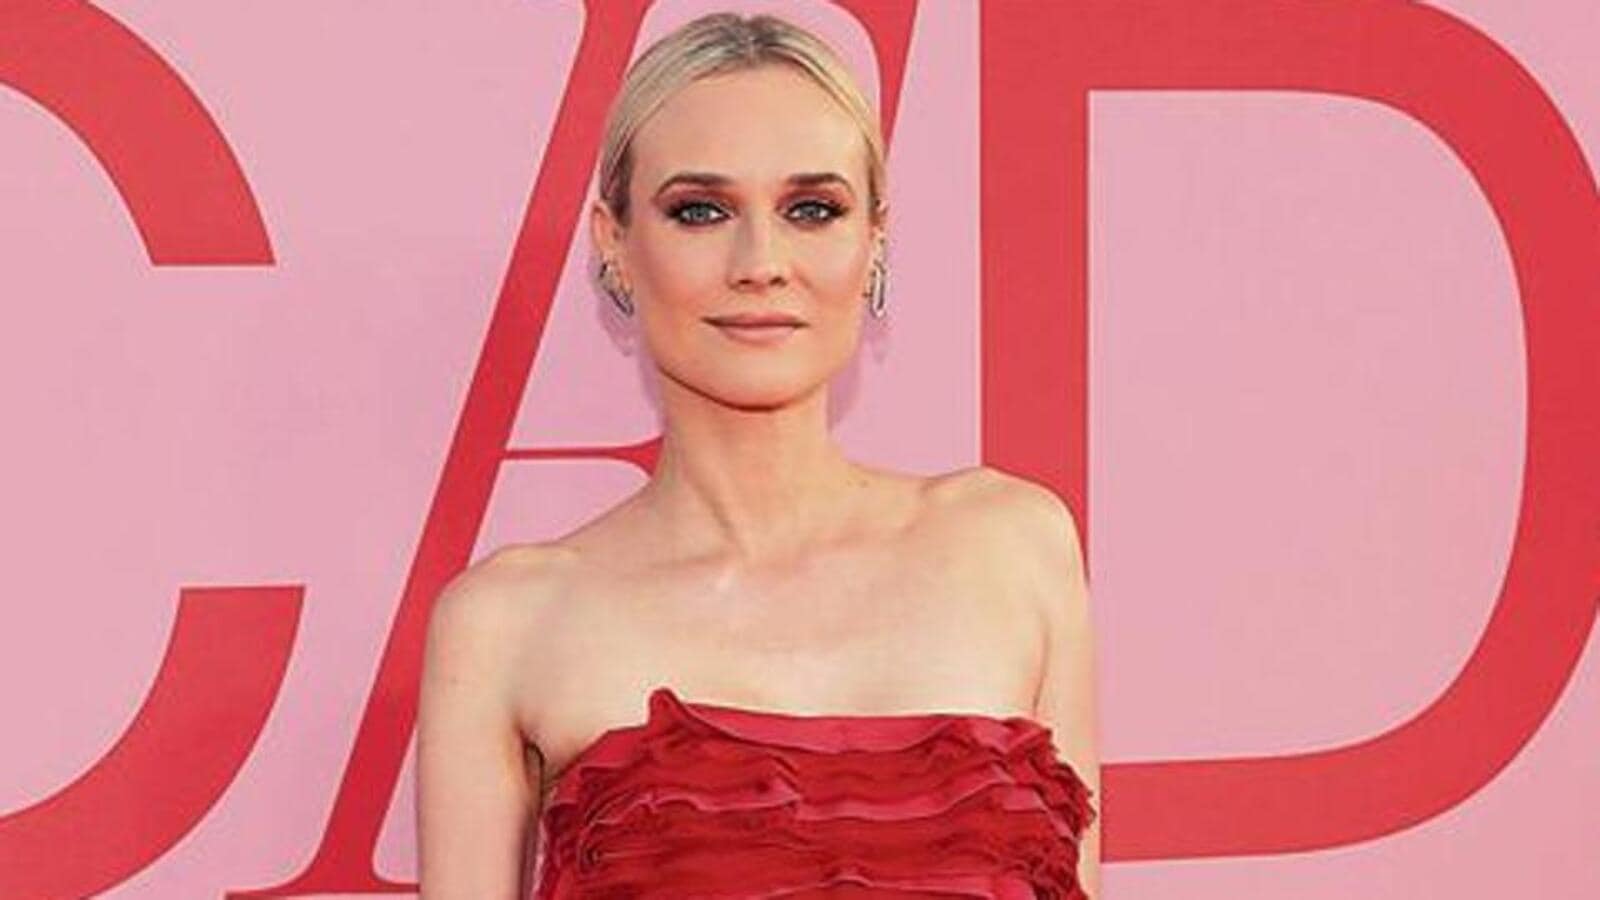 Diane Kruger Has 'Yet to Be Paid the Same Amount as a Male Costar' - TheWrap